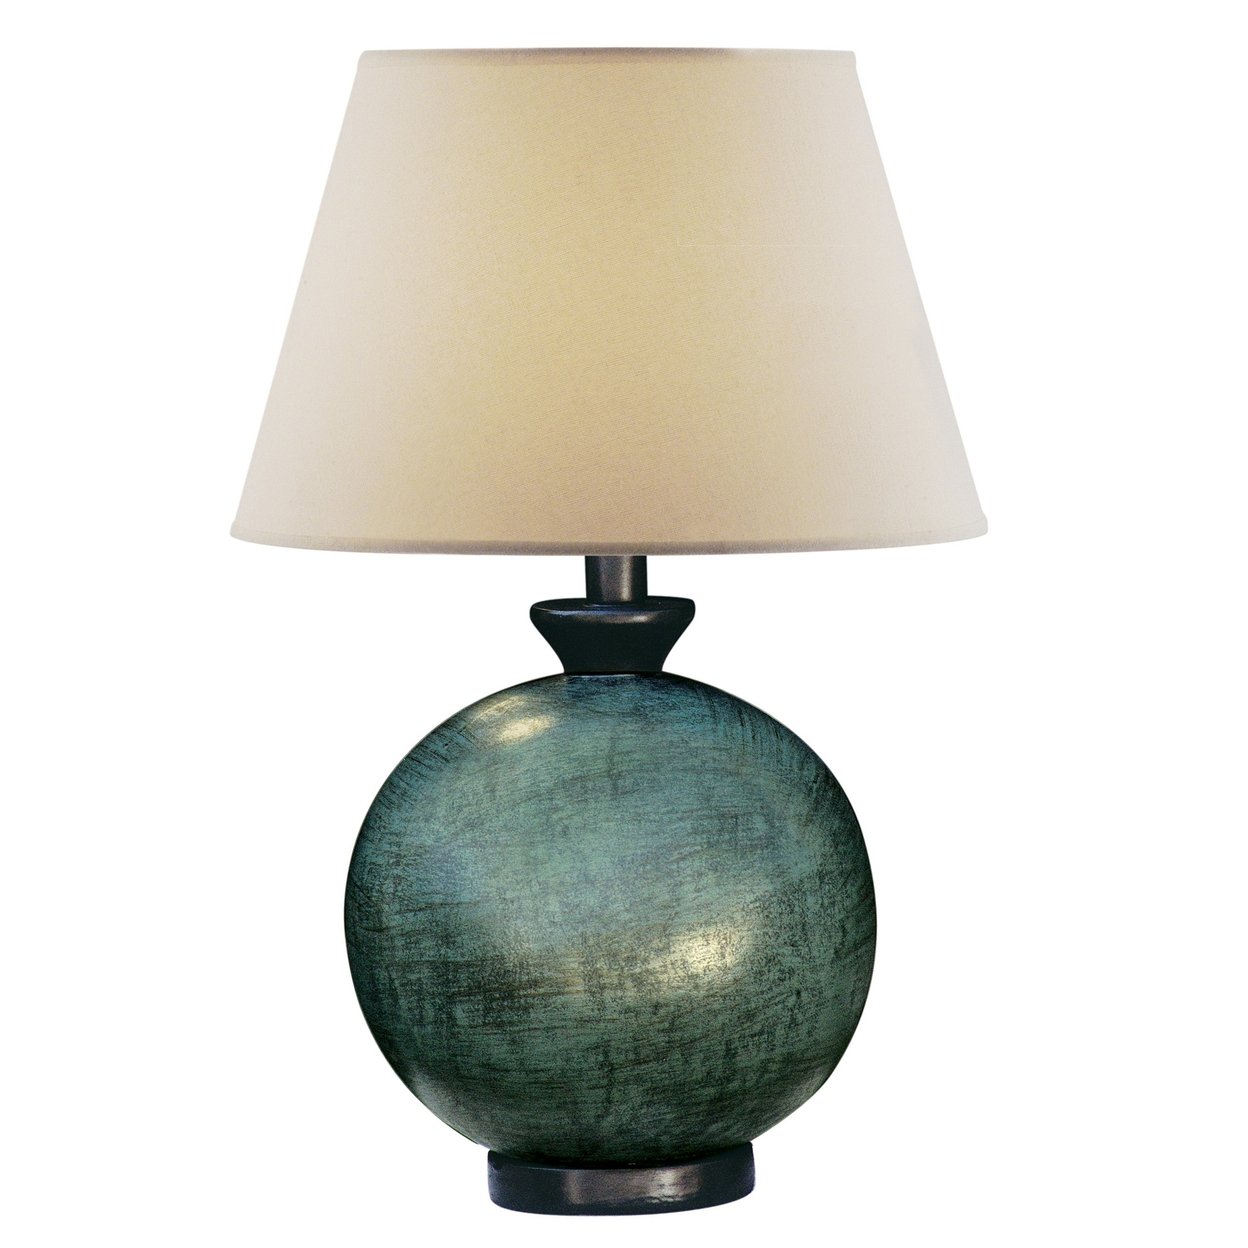 Cleo 26 Inch Table Lamp, Sphere Base, Turquoise Blue, Tapered Fabric Shade- Saltoro Sherpi